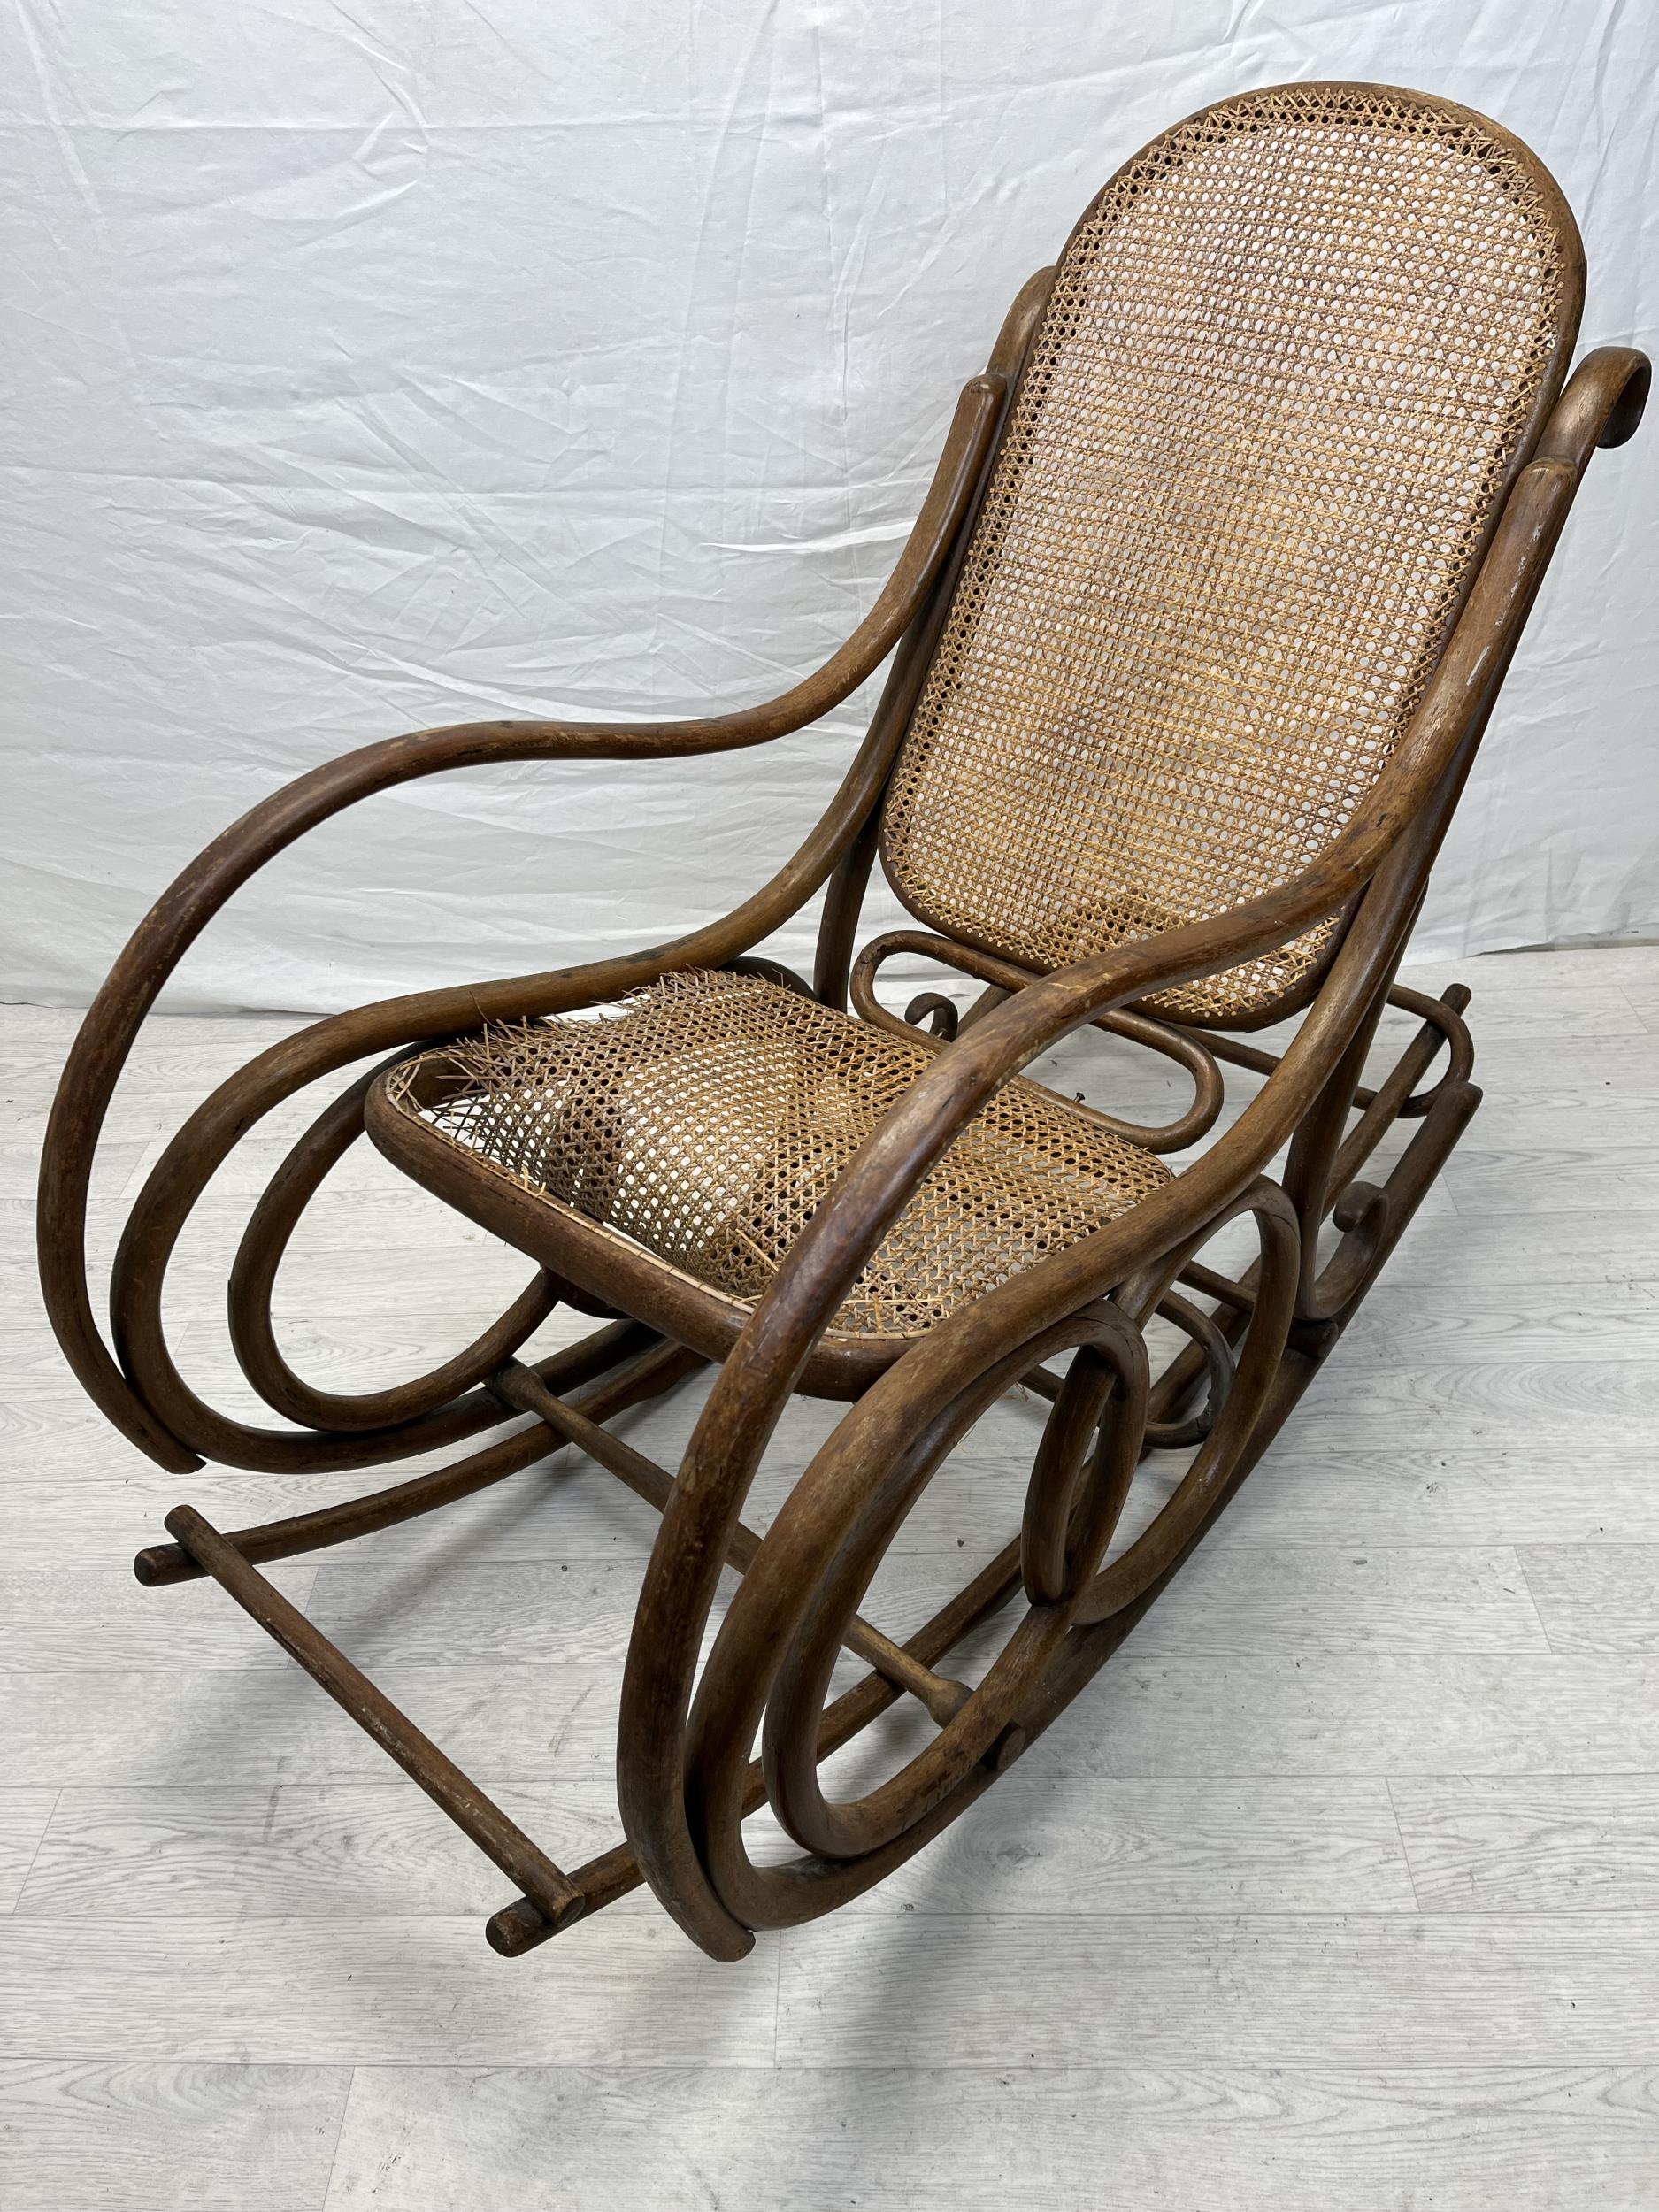 Rocking chair, 19th century Thonet style bentwood with it's separate adjustable runner/footrest. H. - Image 3 of 6